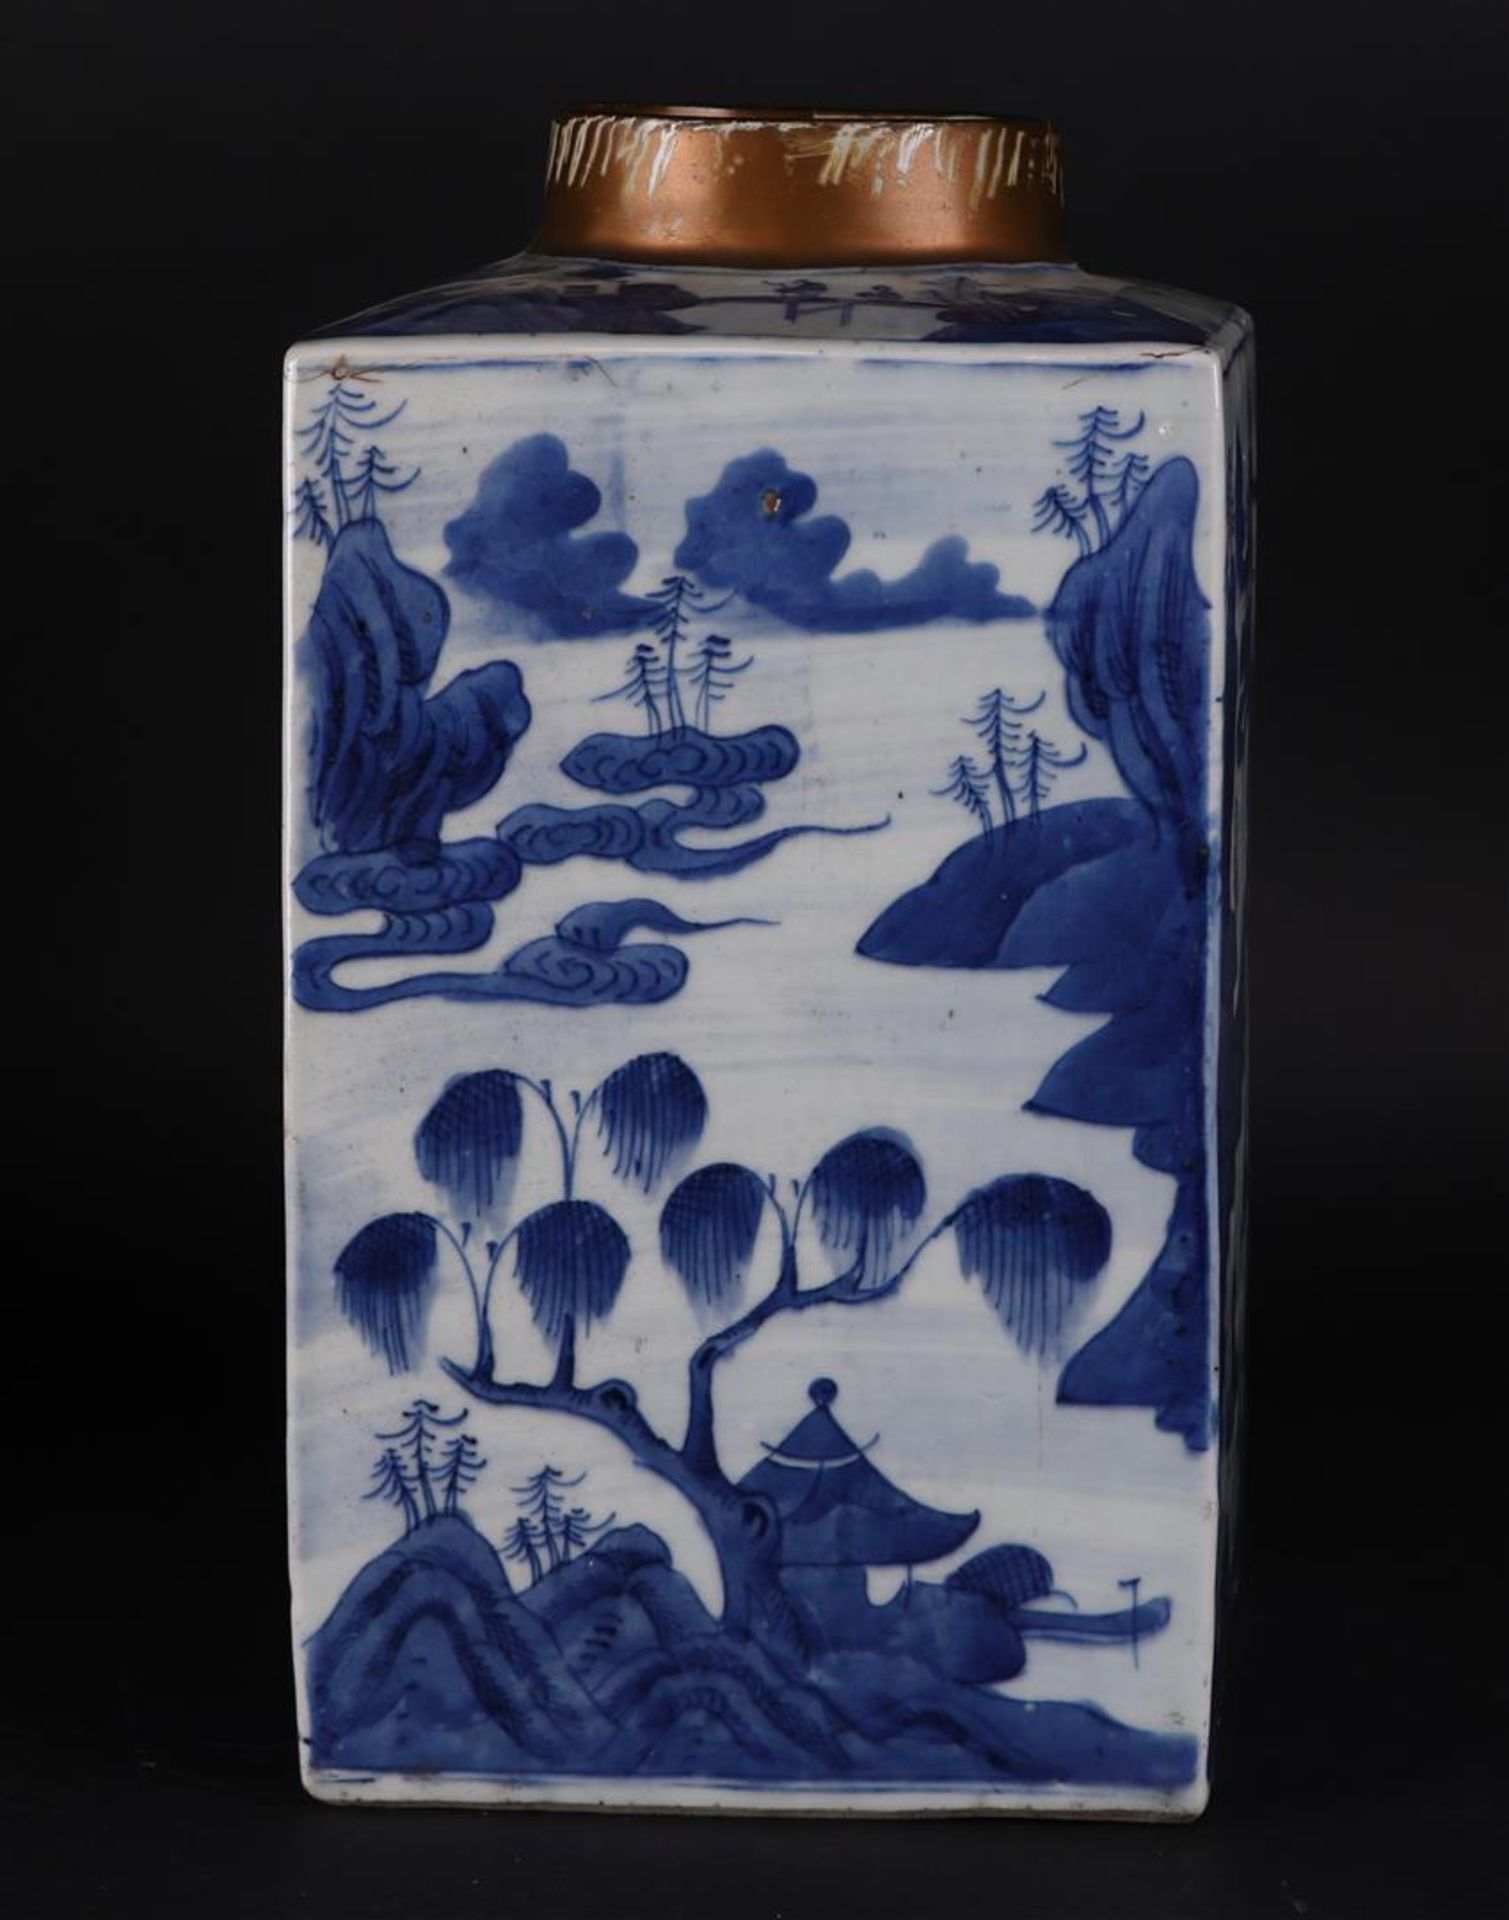 A square porcelain storage jar decorated with various landscapes. China, 19th century. - Image 4 of 6